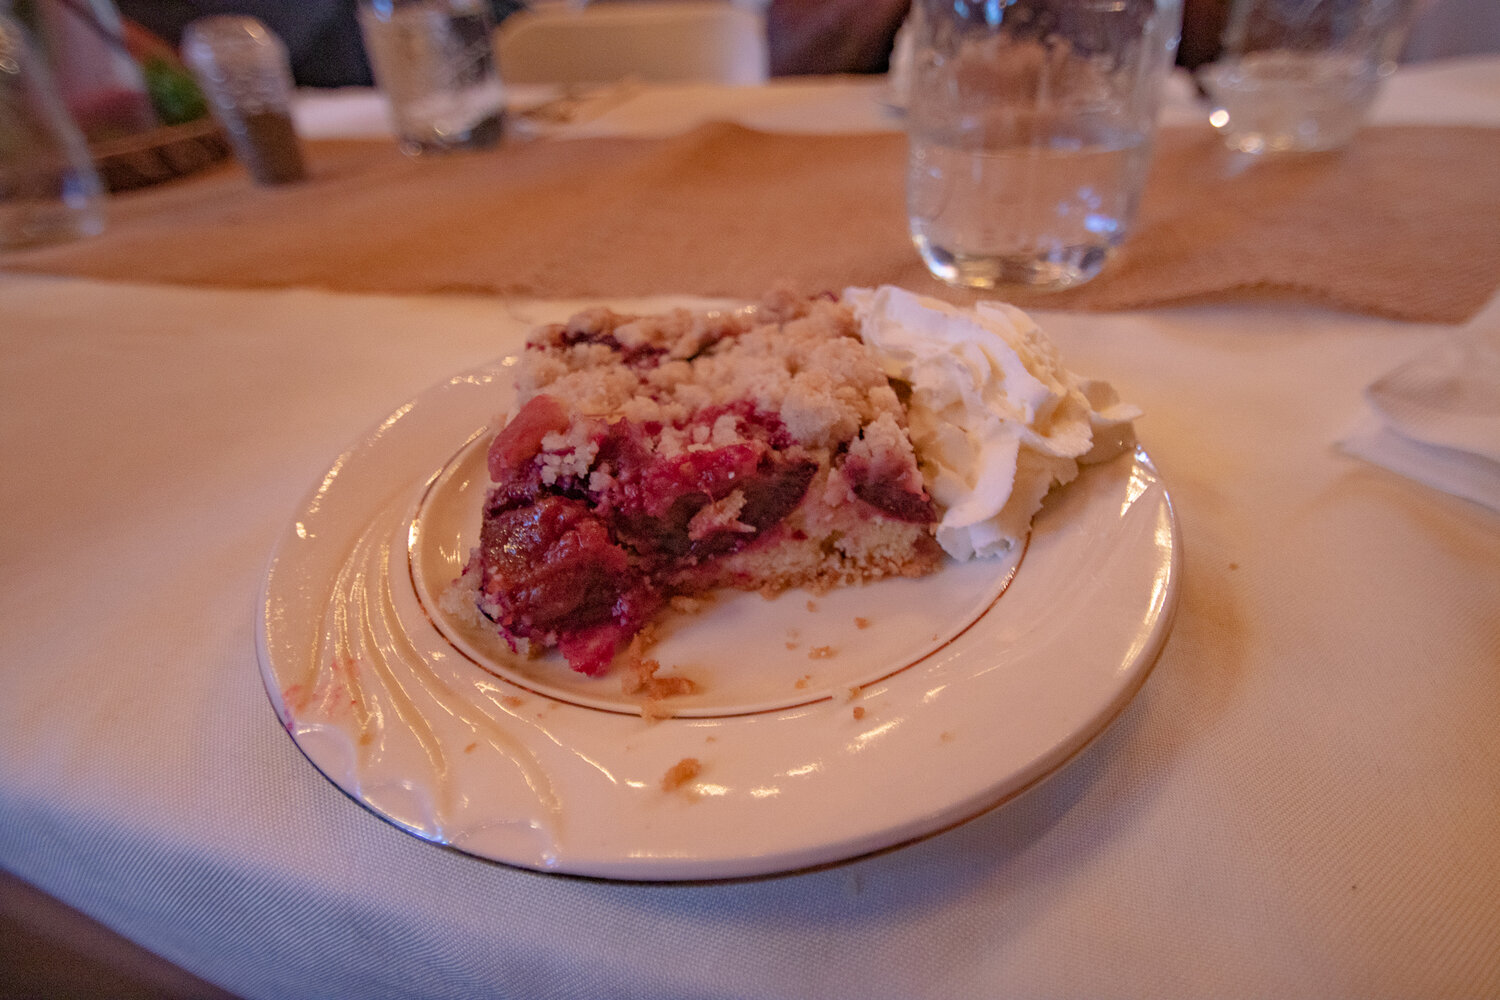 Dessert at the Onalaska Apple Harvest Festival farm to table dinner on Sunday, Oct. 8, at The Mason Jar event center was a delicious, german style plum cake.